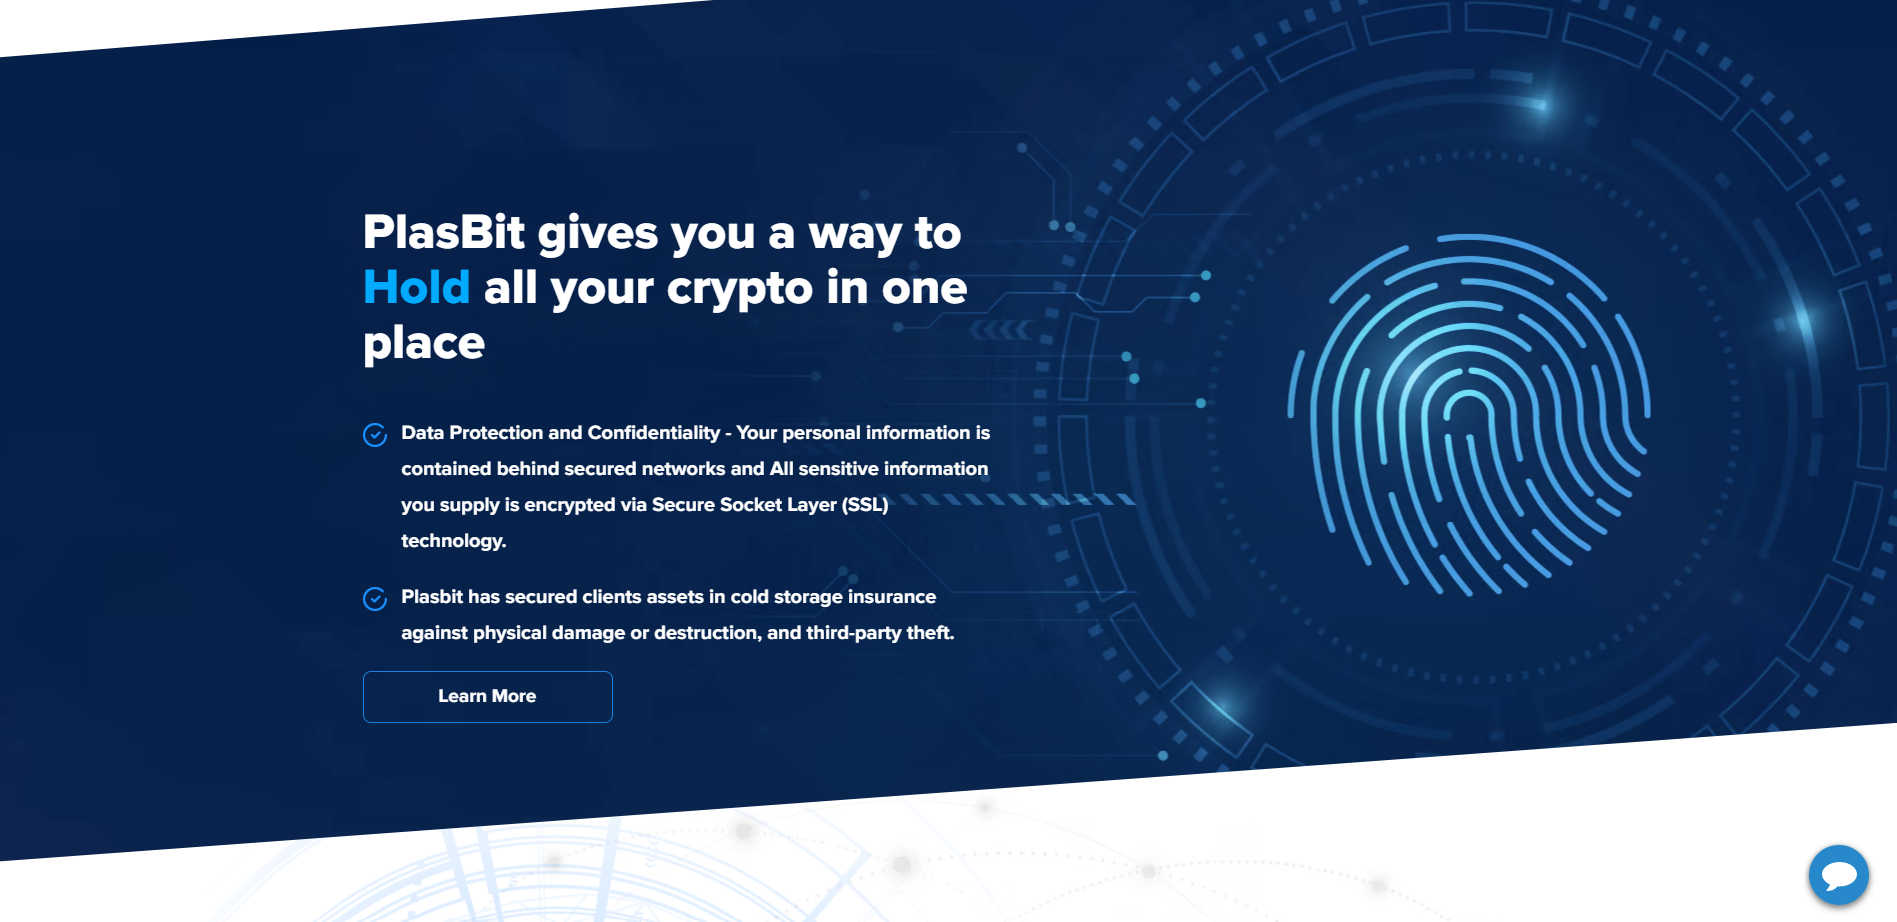 PlasBit gives you a way to Hold all your crypto in one place